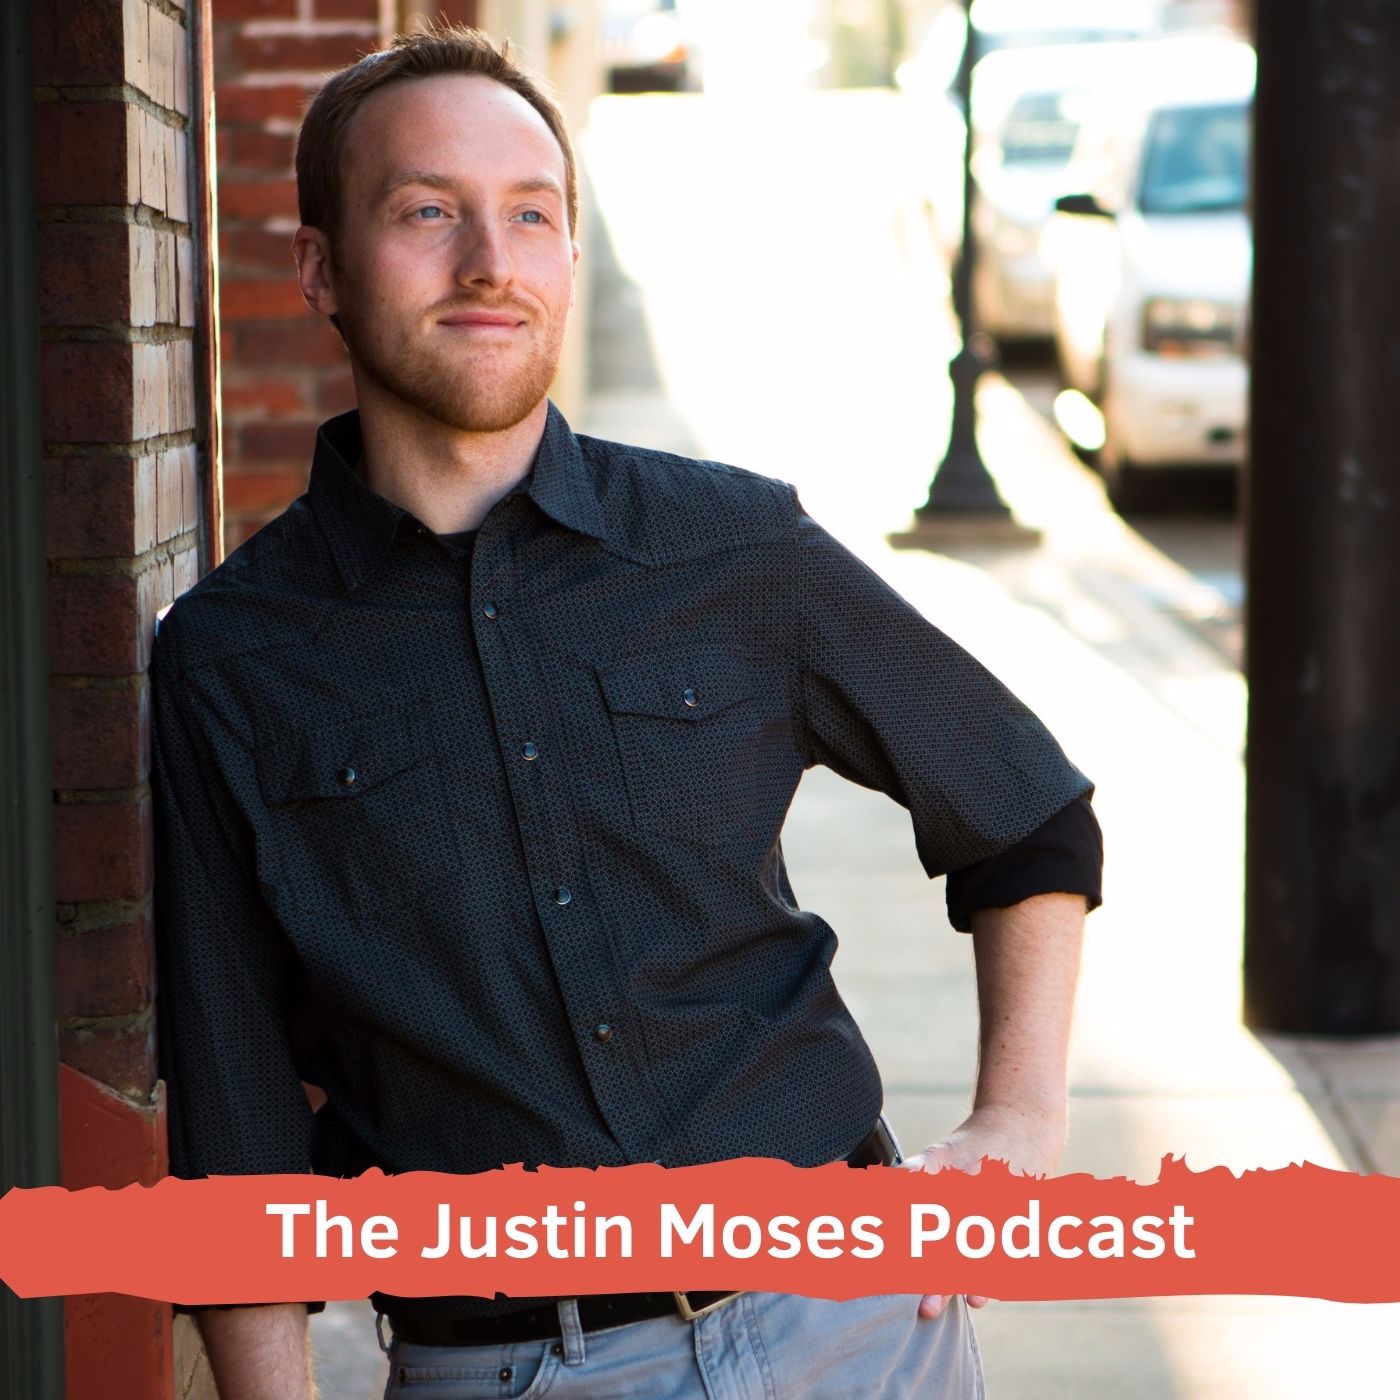 The Justin Moses Podcast